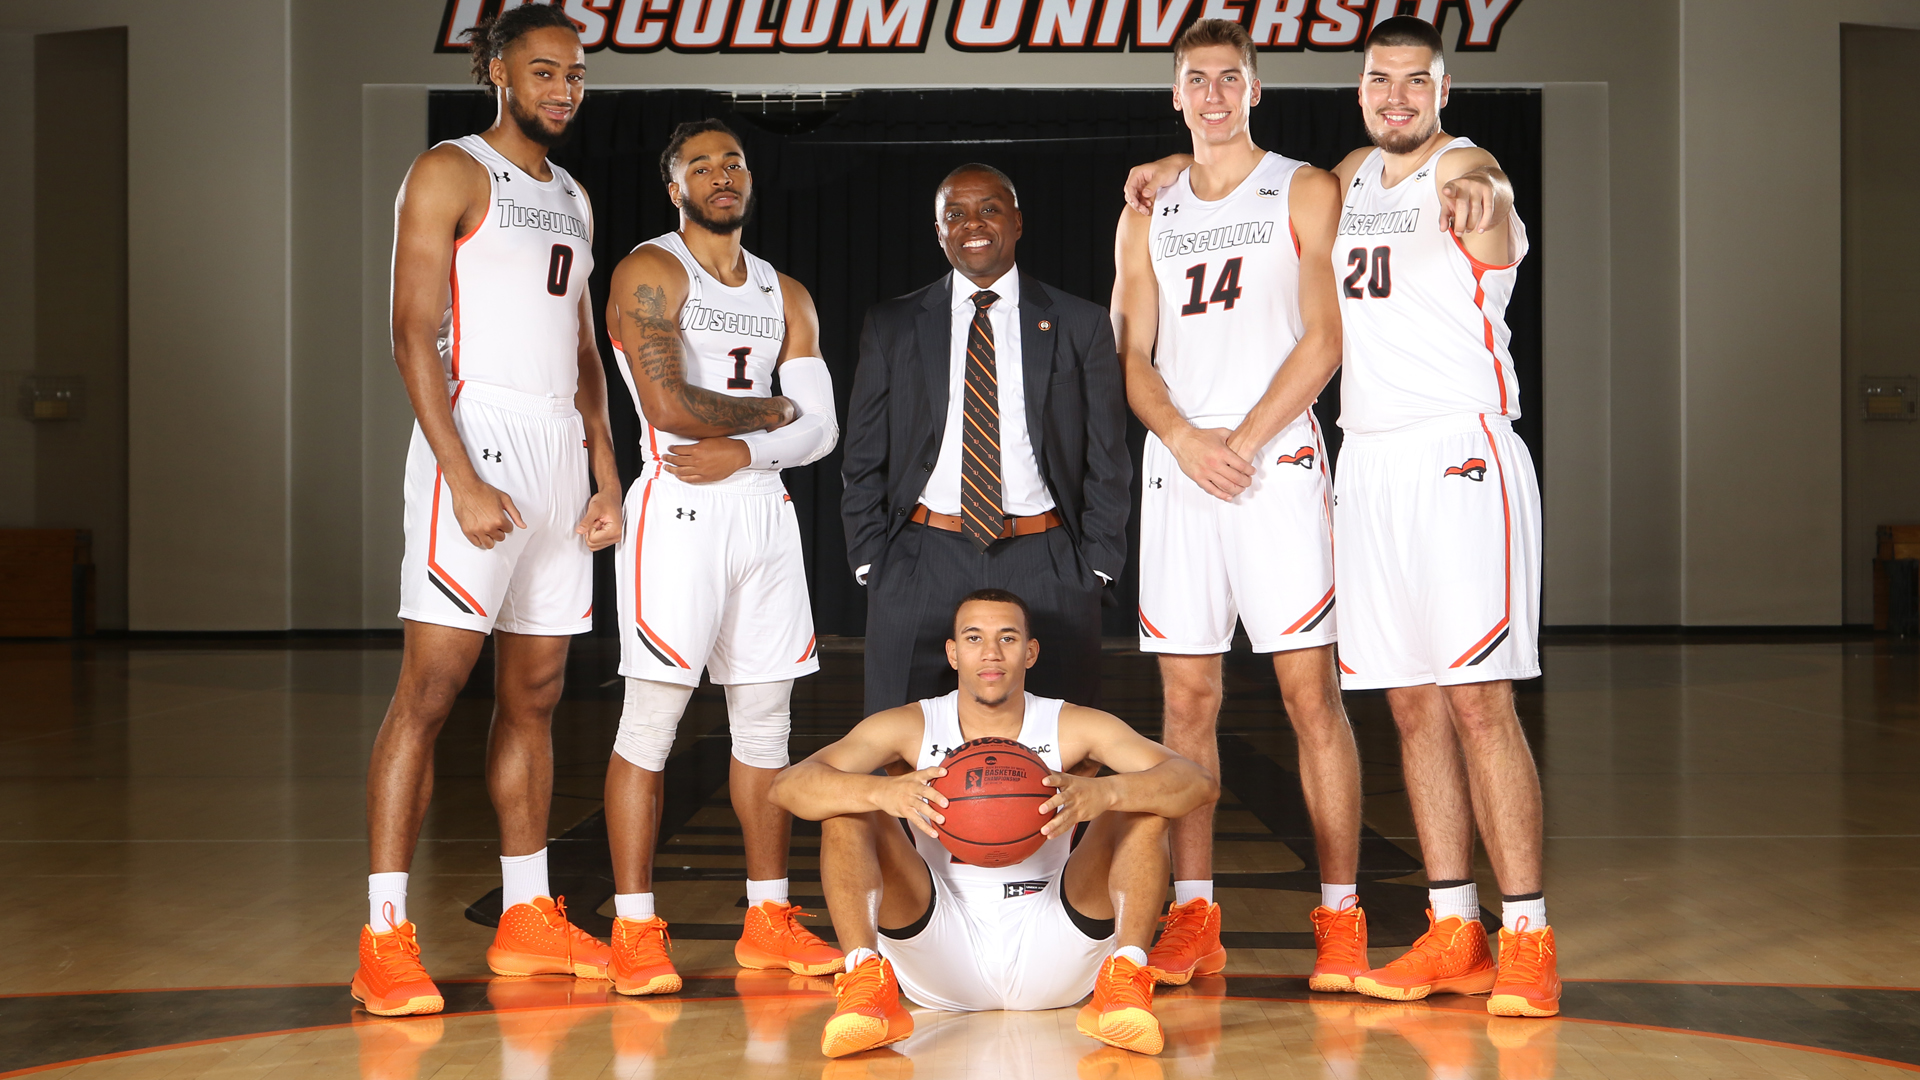 Tusculum closes out home schedule with Eagles, Cobras